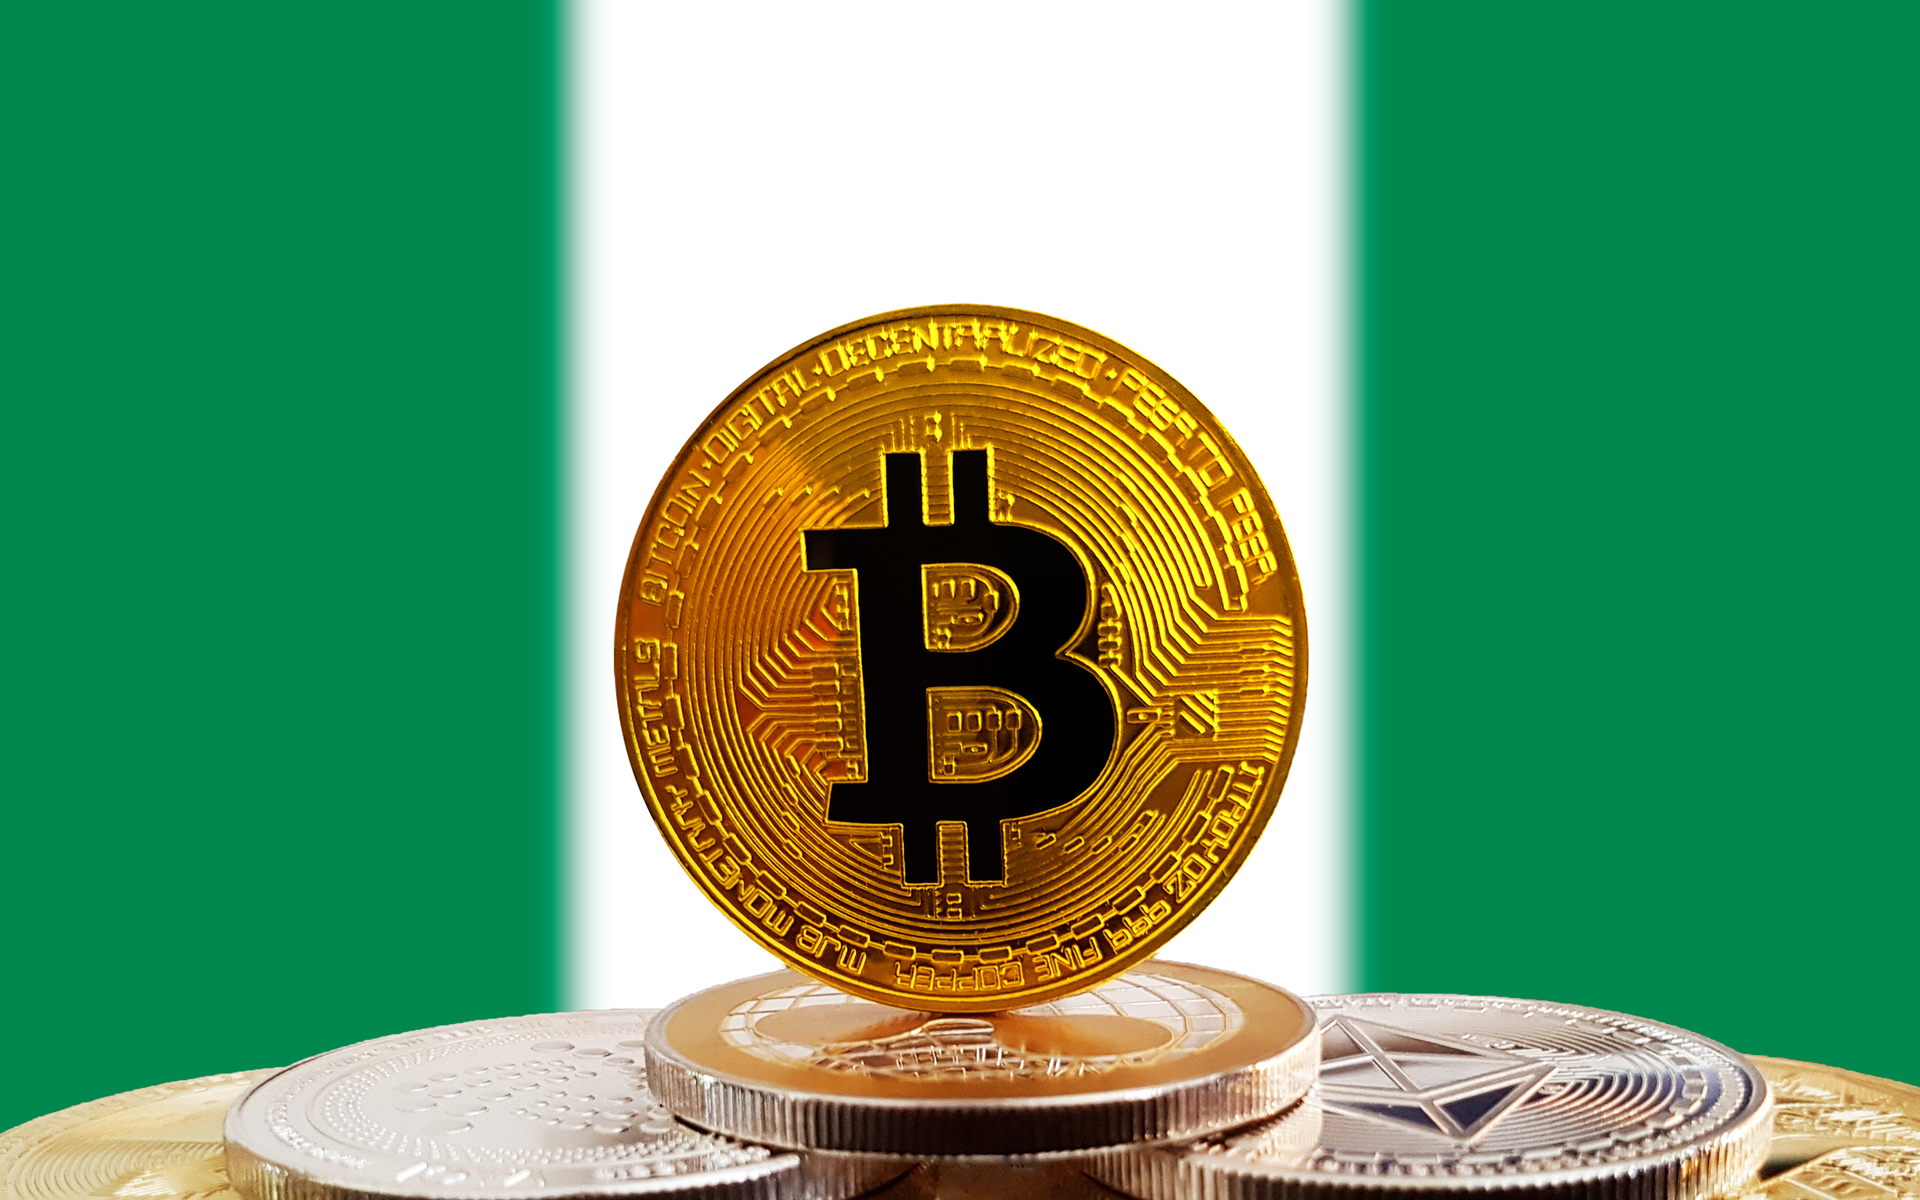 Nigeria Enforces Ban on Bitcoin, Ripple (XRP), and Cryptocurrency Access Amidst Currency Decline, Hindering Pursuit of Financial Independence